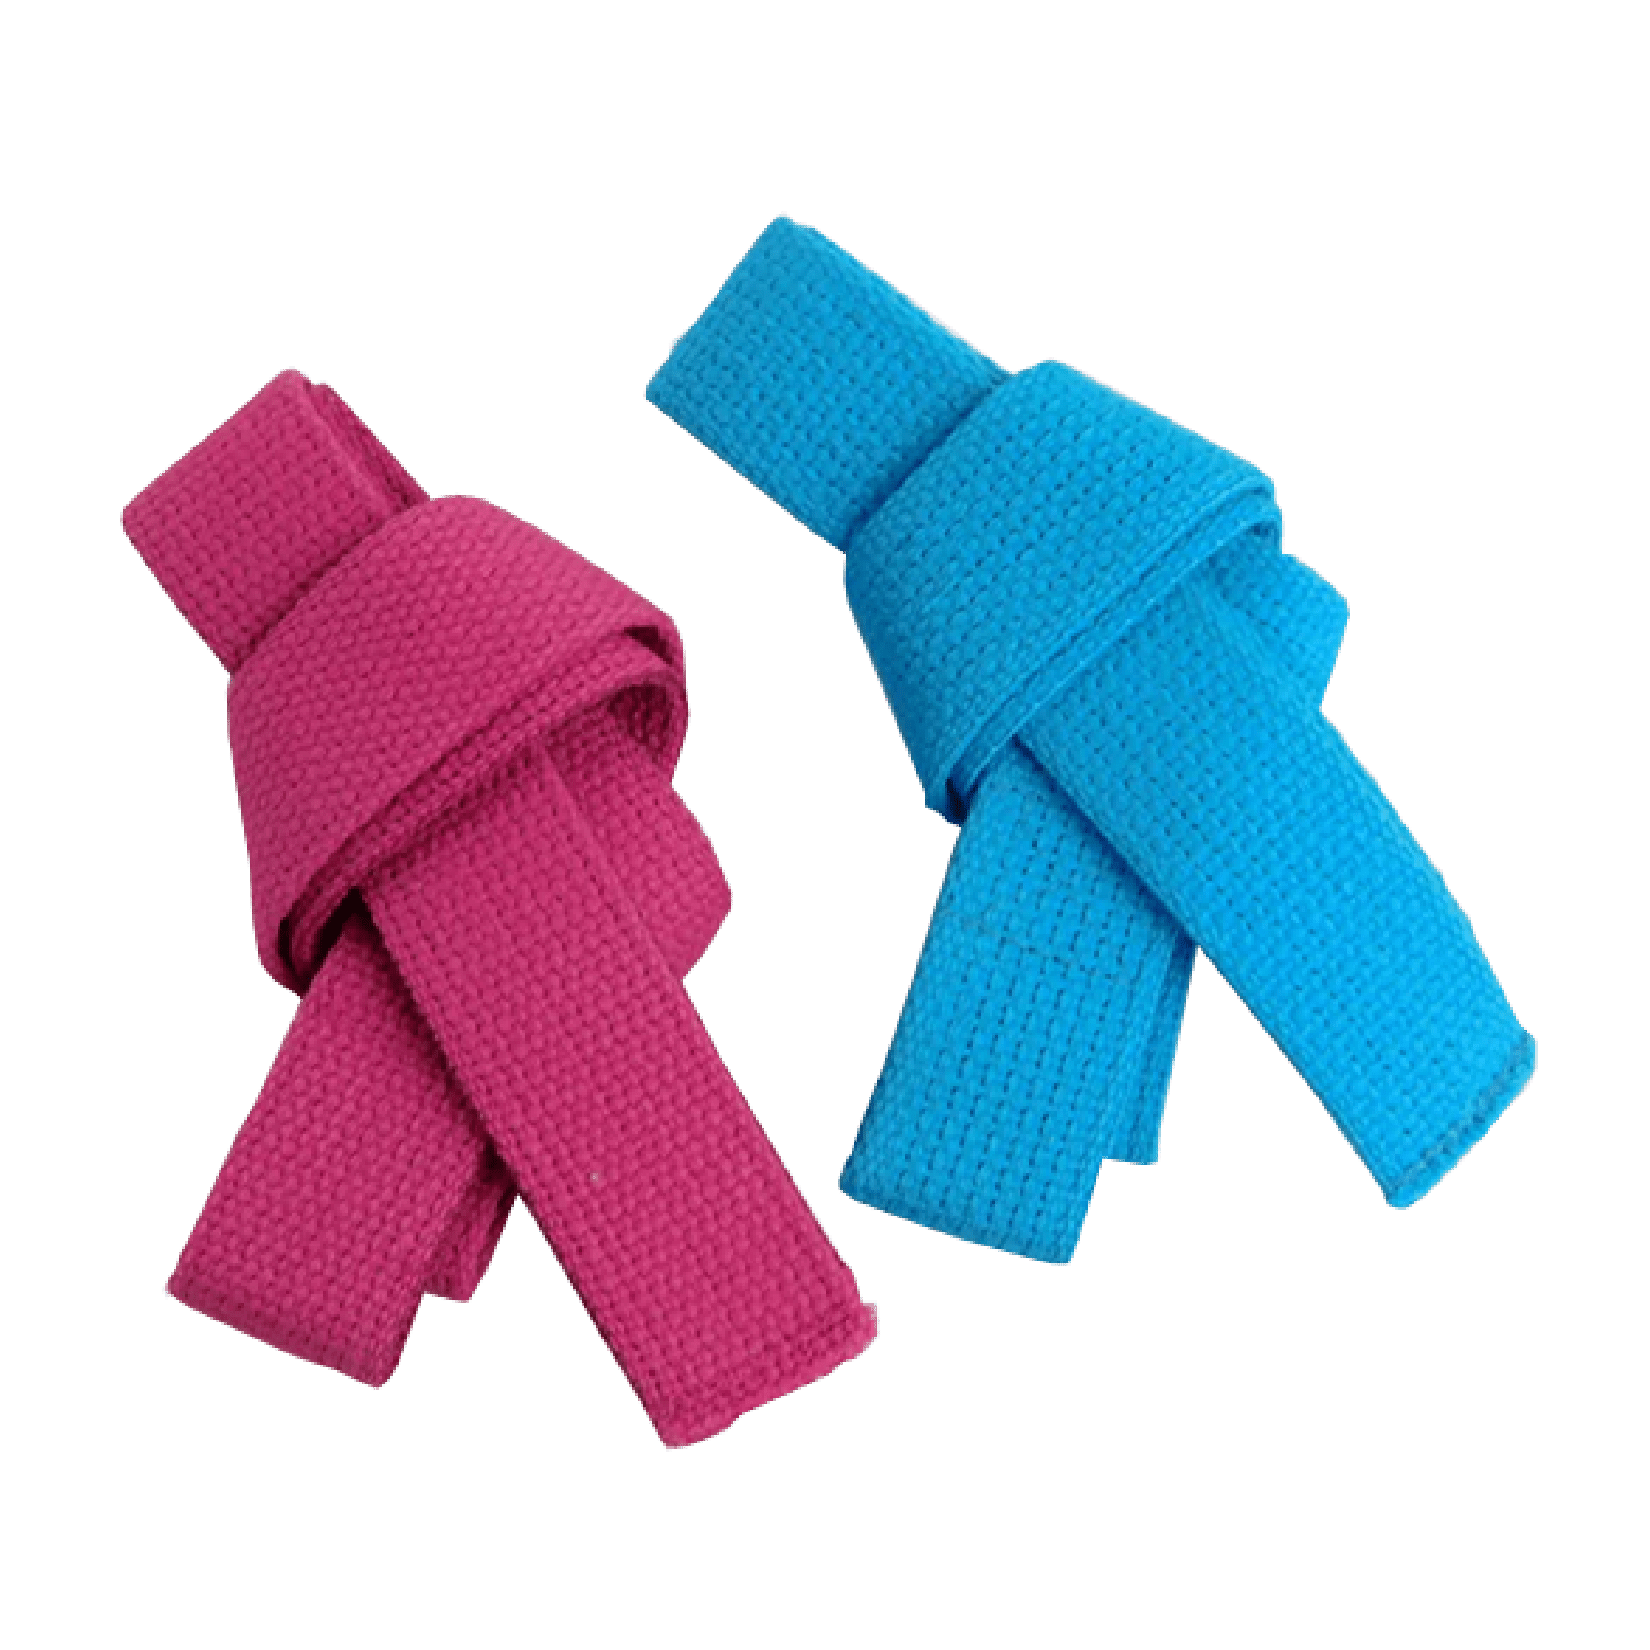 MH Designer Lifting Straps (Multiple Colors)-Straps-Flaman Fitness-1